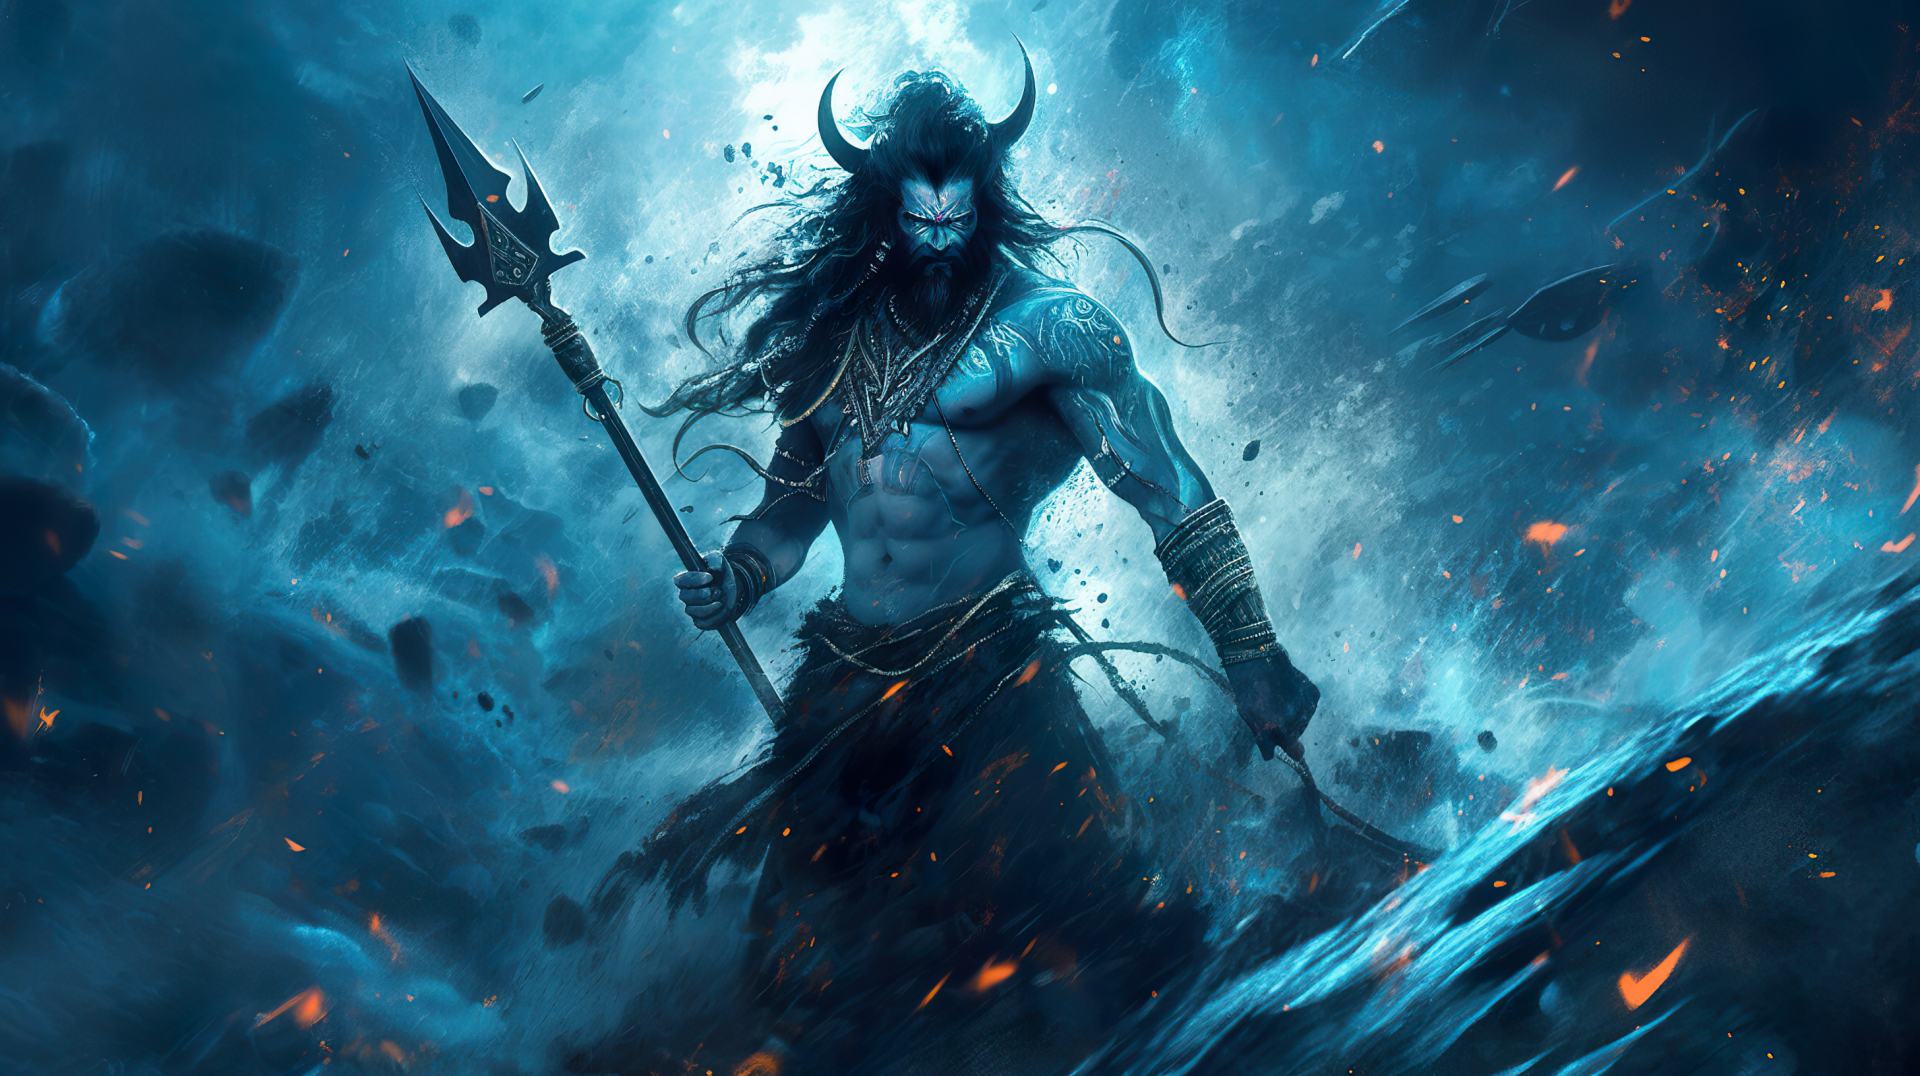 Shiva Background Images, HD Pictures and Wallpaper For Free Download |  Pngtree